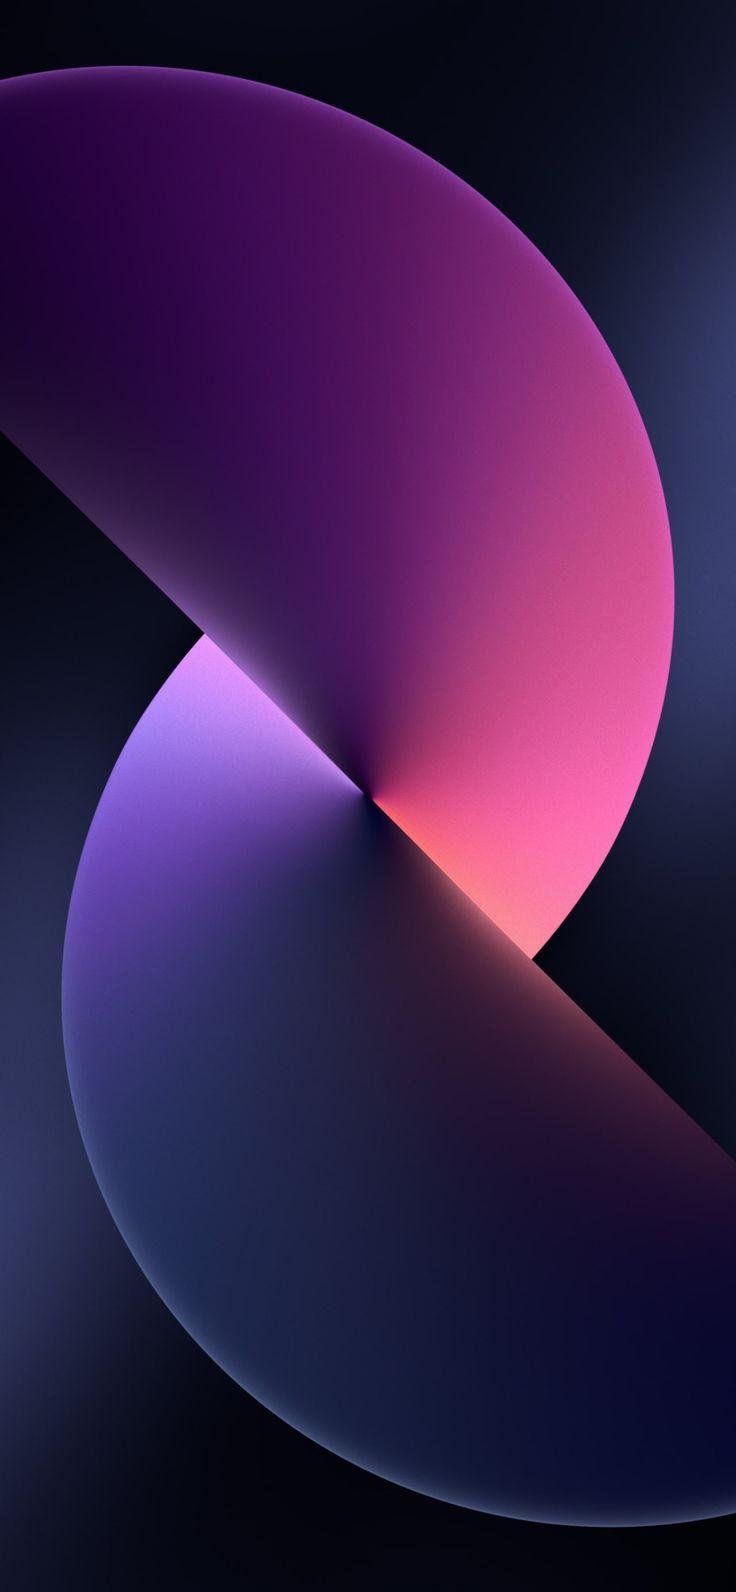 The Official Ios Wallpaper For iPhone Live